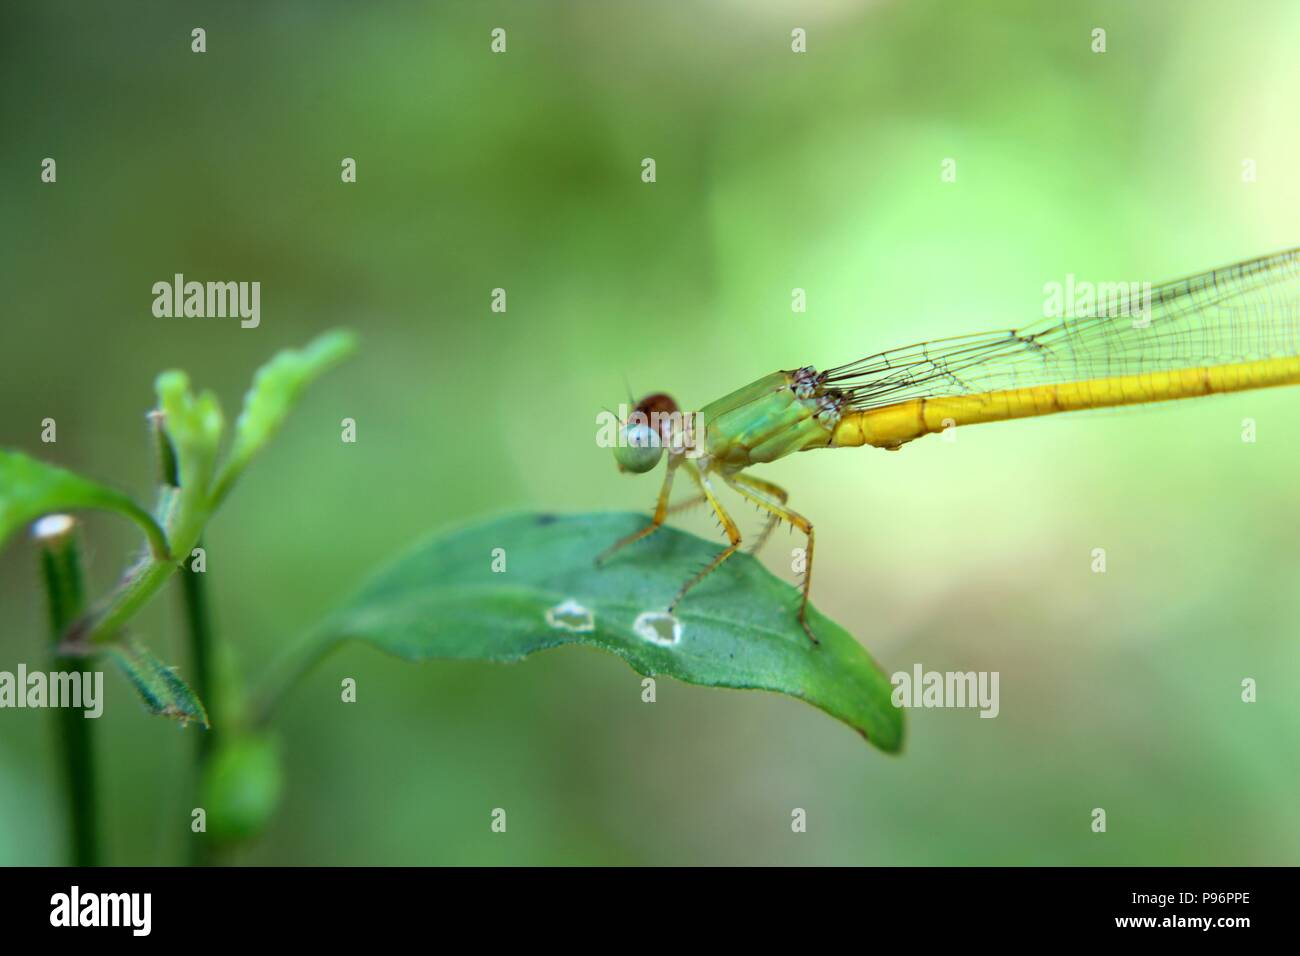 close up - macro view of a dragonfly -flying  insect seen on a green / grass plant in a home garden in Sri Lanka Stock Photo